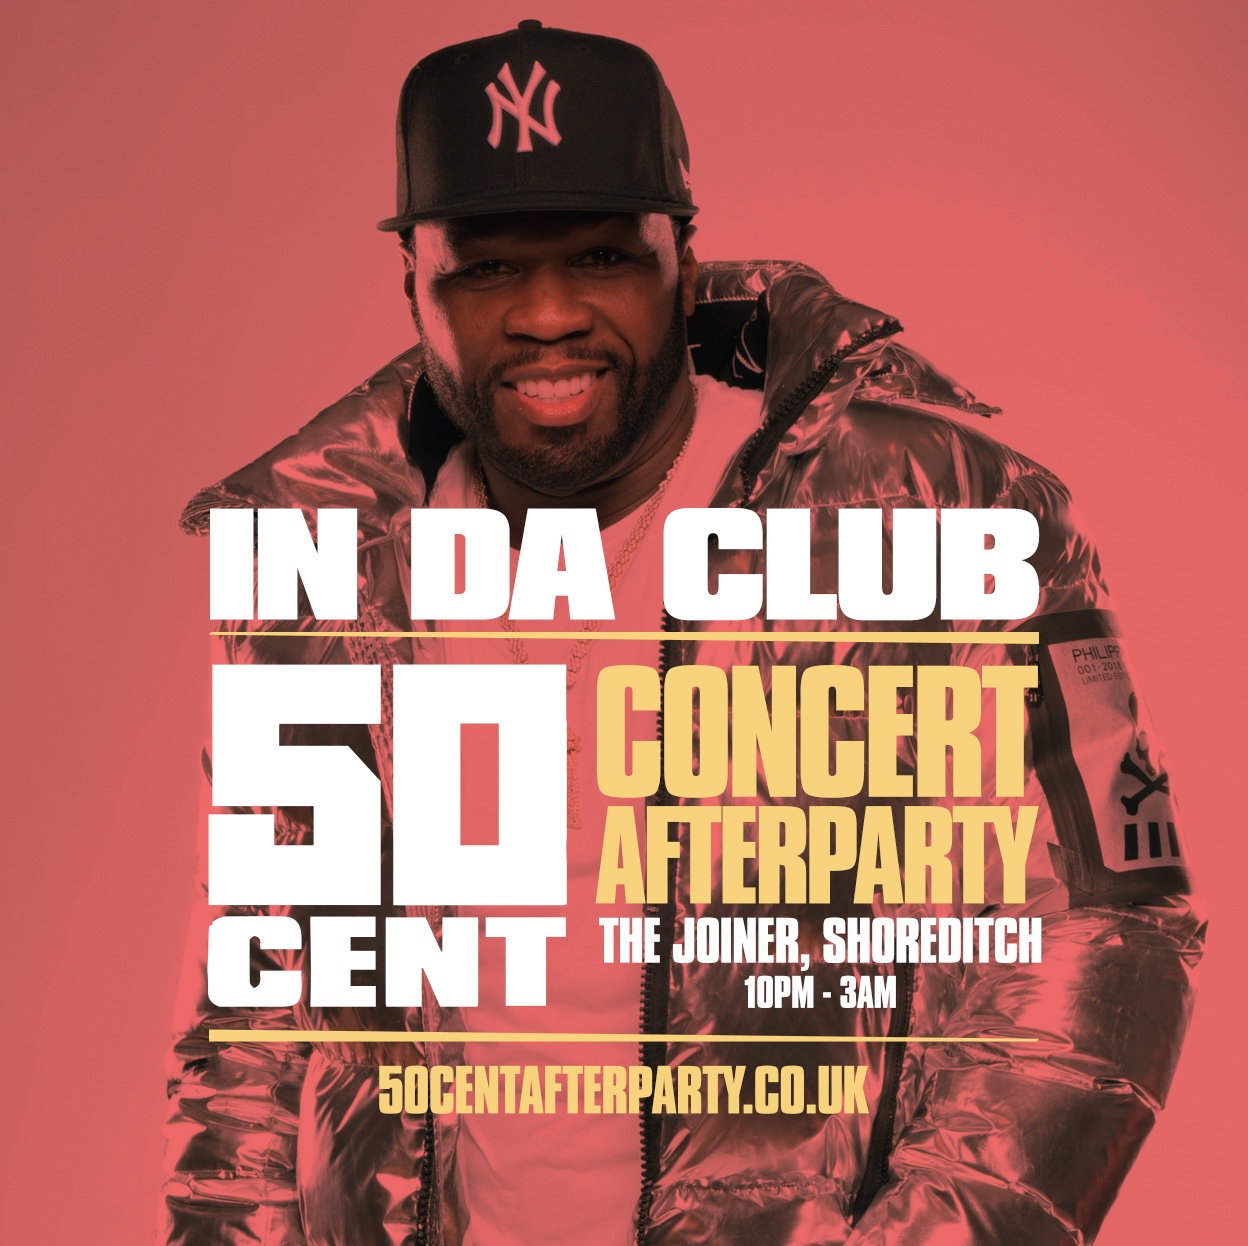 In Da Club - 50 Cent Concert After Party at The Joiner on Worship, London  on 10th Jun 2022 | Fatsoma